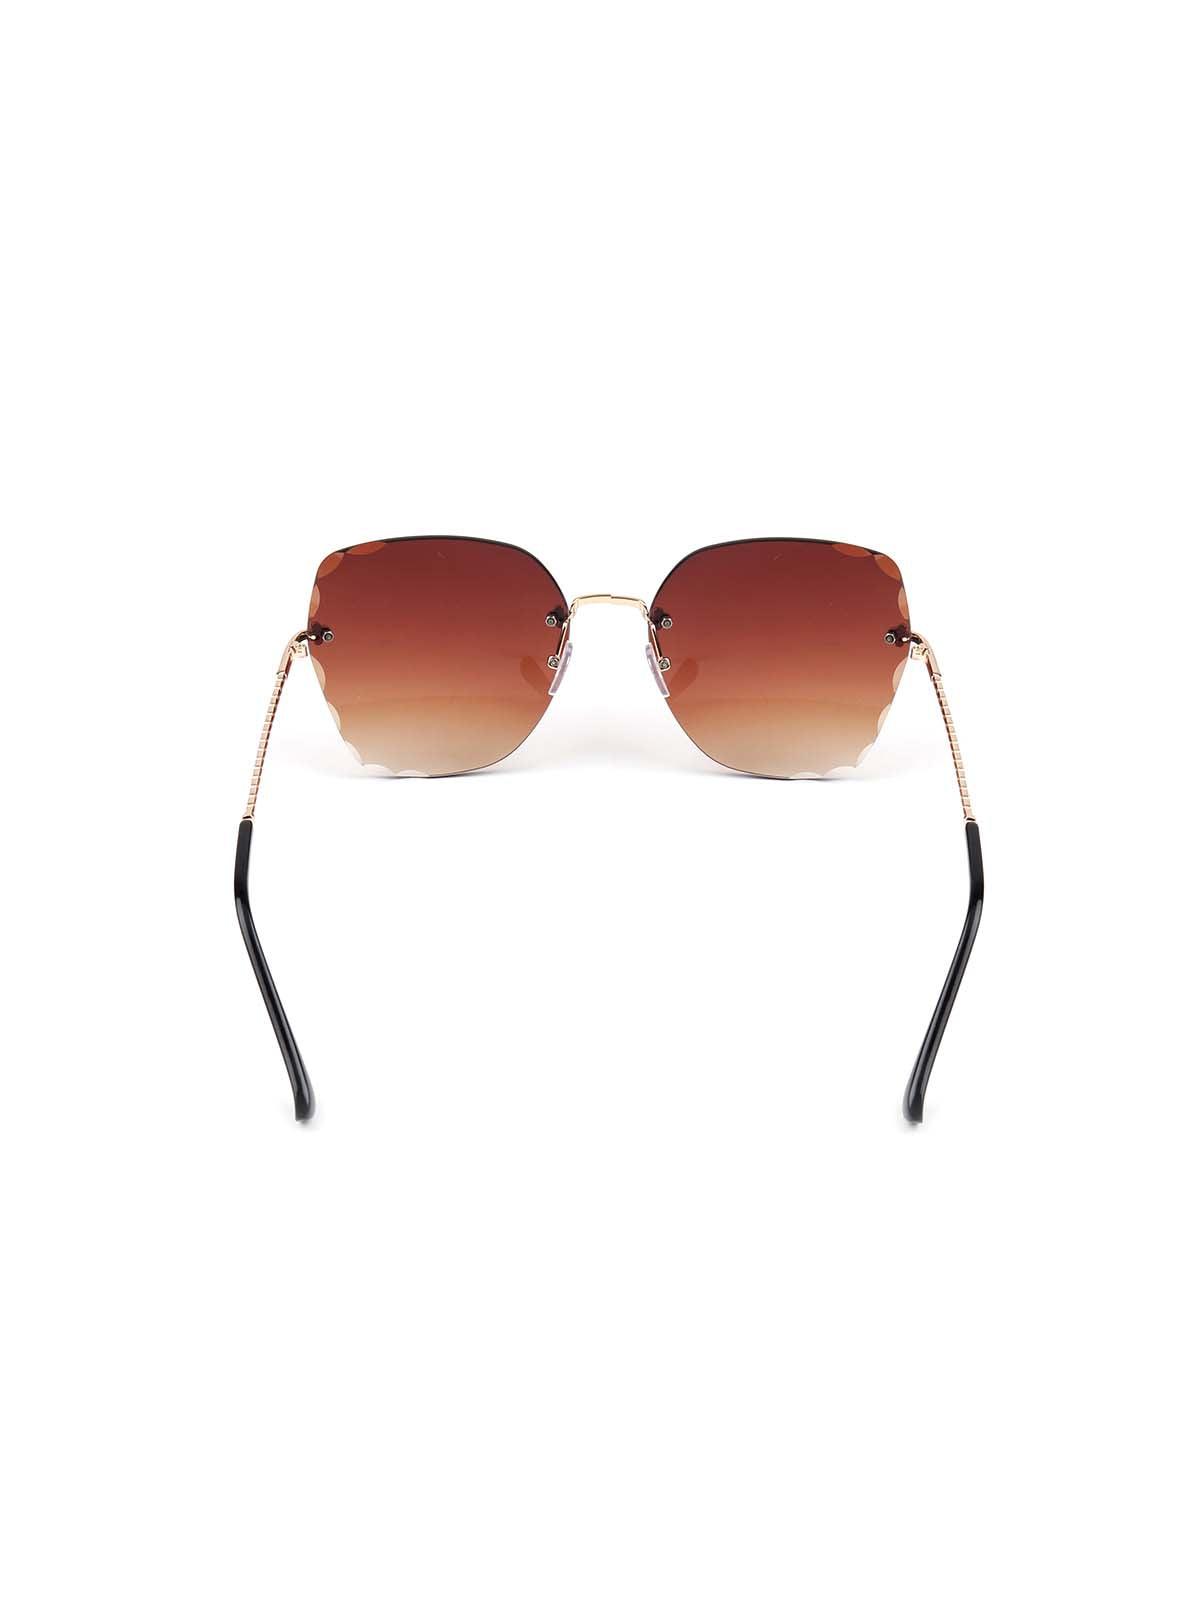 Two-colour Sunglasses with UV400 protection Colour: black and orange